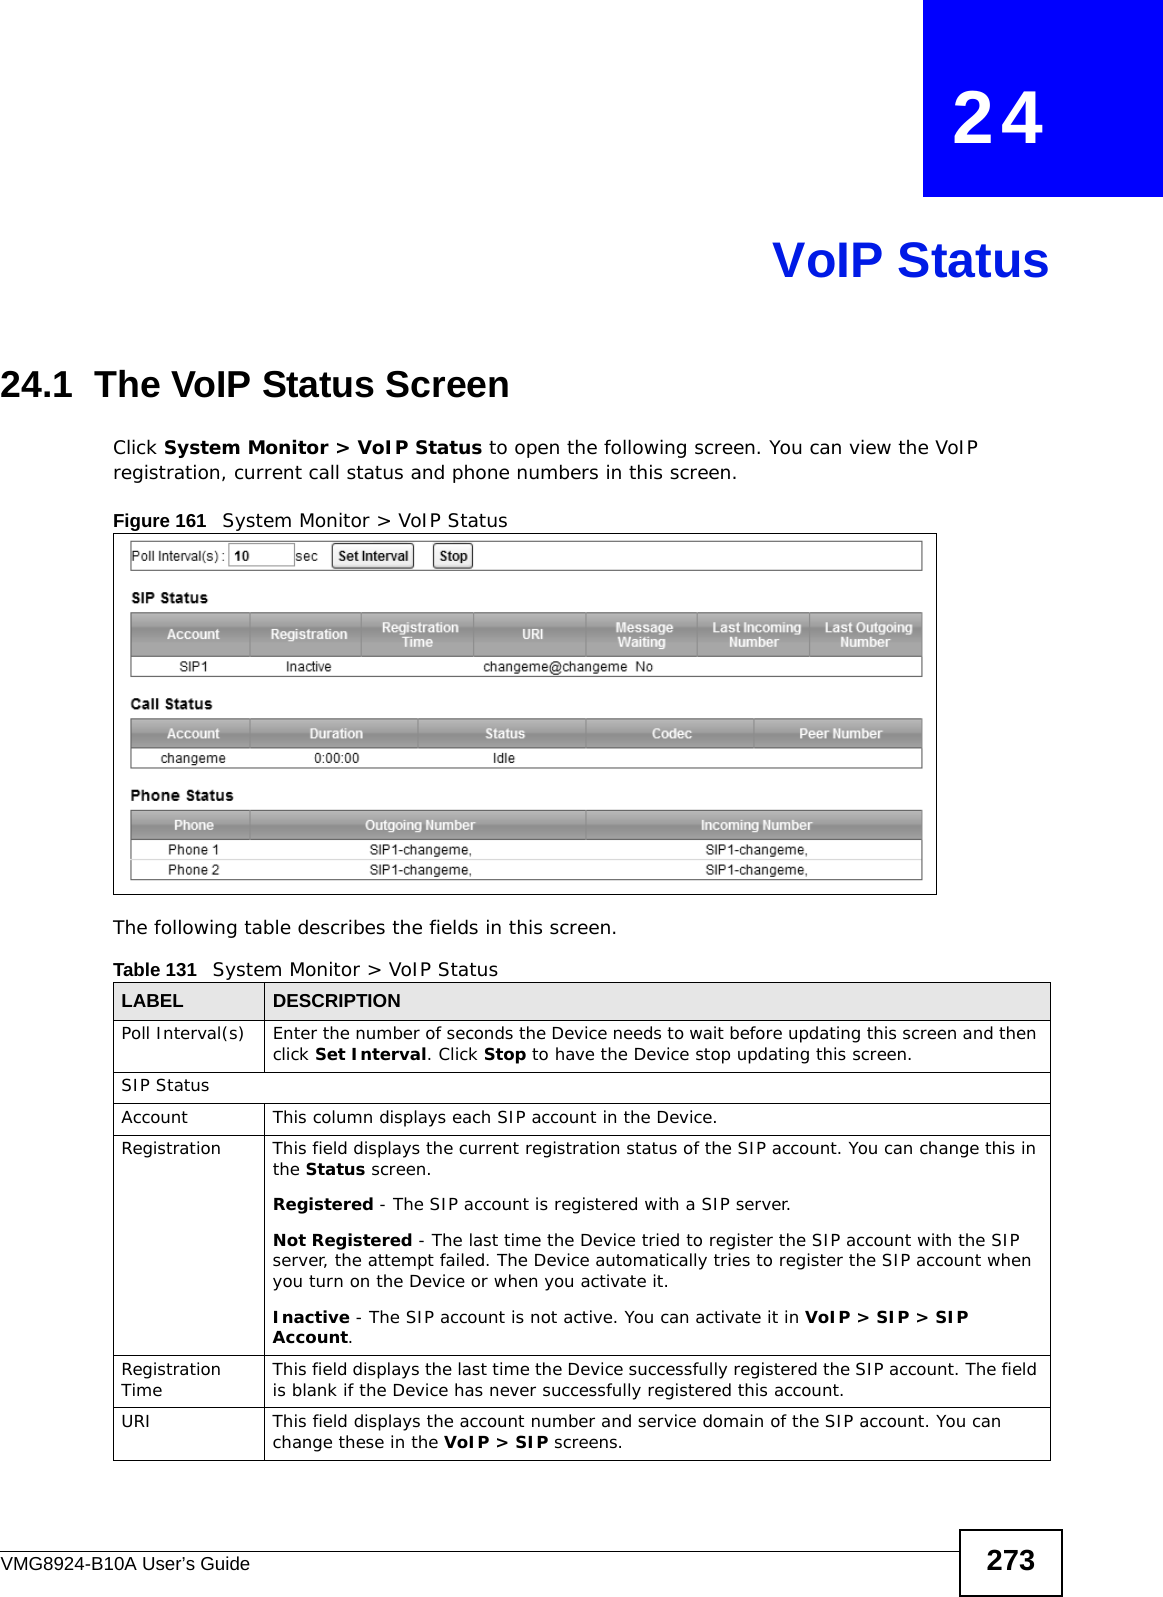 VMG8924-B10A User’s Guide 273CHAPTER   24 VoIP Status24.1  The VoIP Status ScreenClick System Monitor &gt; VoIP Status to open the following screen. You can view the VoIP registration, current call status and phone numbers in this screen.Figure 161   System Monitor &gt; VoIP StatusThe following table describes the fields in this screen. Table 131   System Monitor &gt; VoIP StatusLABEL DESCRIPTIONPoll Interval(s) Enter the number of seconds the Device needs to wait before updating this screen and then click Set Interval. Click Stop to have the Device stop updating this screen.SIP StatusAccount This column displays each SIP account in the Device.Registration This field displays the current registration status of the SIP account. You can change this in the Status screen.Registered - The SIP account is registered with a SIP server.Not Registered - The last time the Device tried to register the SIP account with the SIP server, the attempt failed. The Device automatically tries to register the SIP account when you turn on the Device or when you activate it.Inactive - The SIP account is not active. You can activate it in VoIP &gt; SIP &gt; SIP Account.Registration Time This field displays the last time the Device successfully registered the SIP account. The field is blank if the Device has never successfully registered this account.URI This field displays the account number and service domain of the SIP account. You can change these in the VoIP &gt; SIP screens.